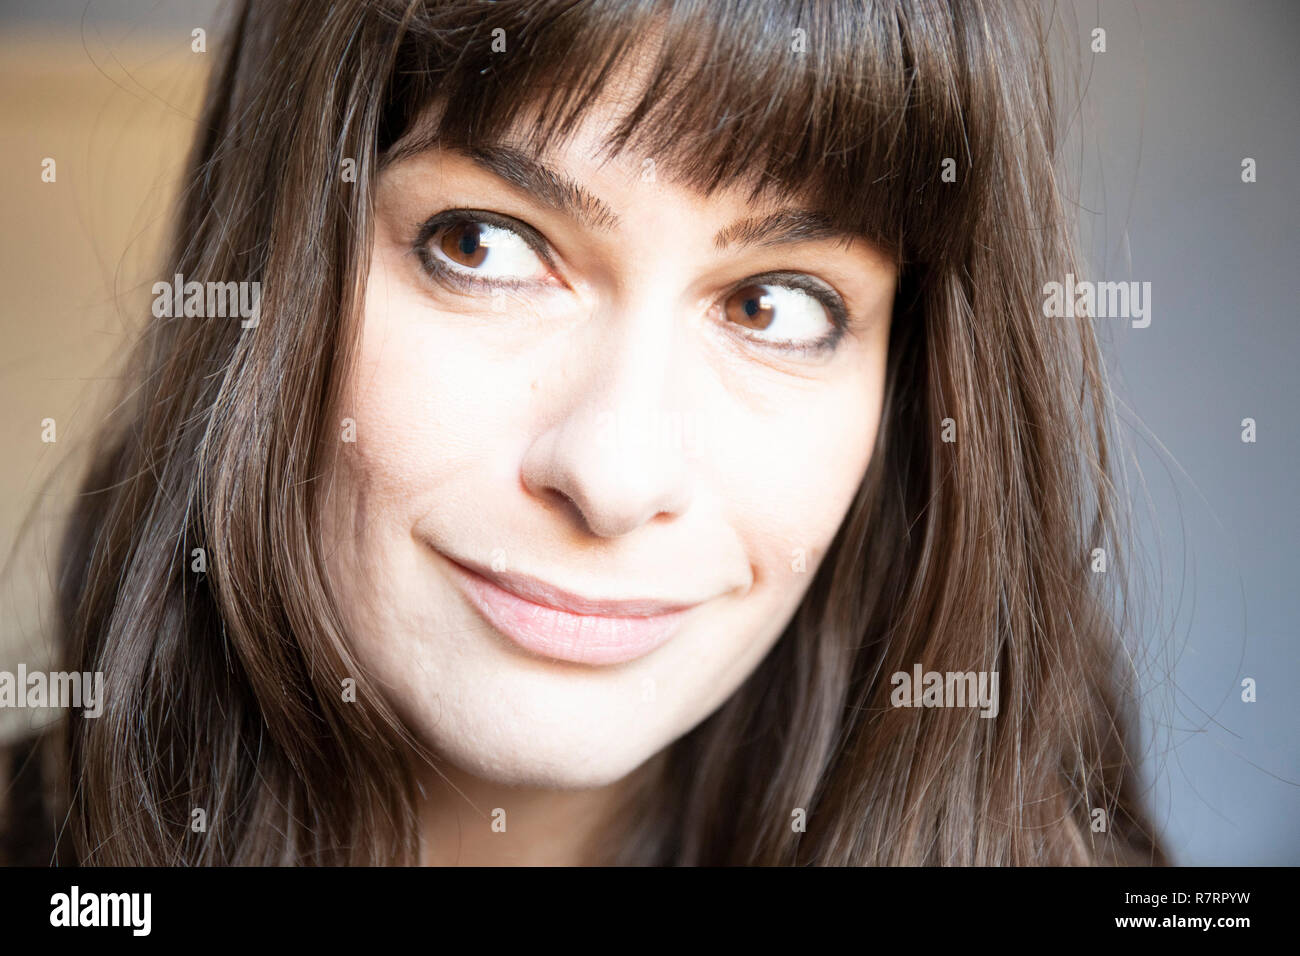 Young woman close-up portrait. Caucasian with brown long hair and bangs. Smiling expression with dimples, looking right. Stock Photo